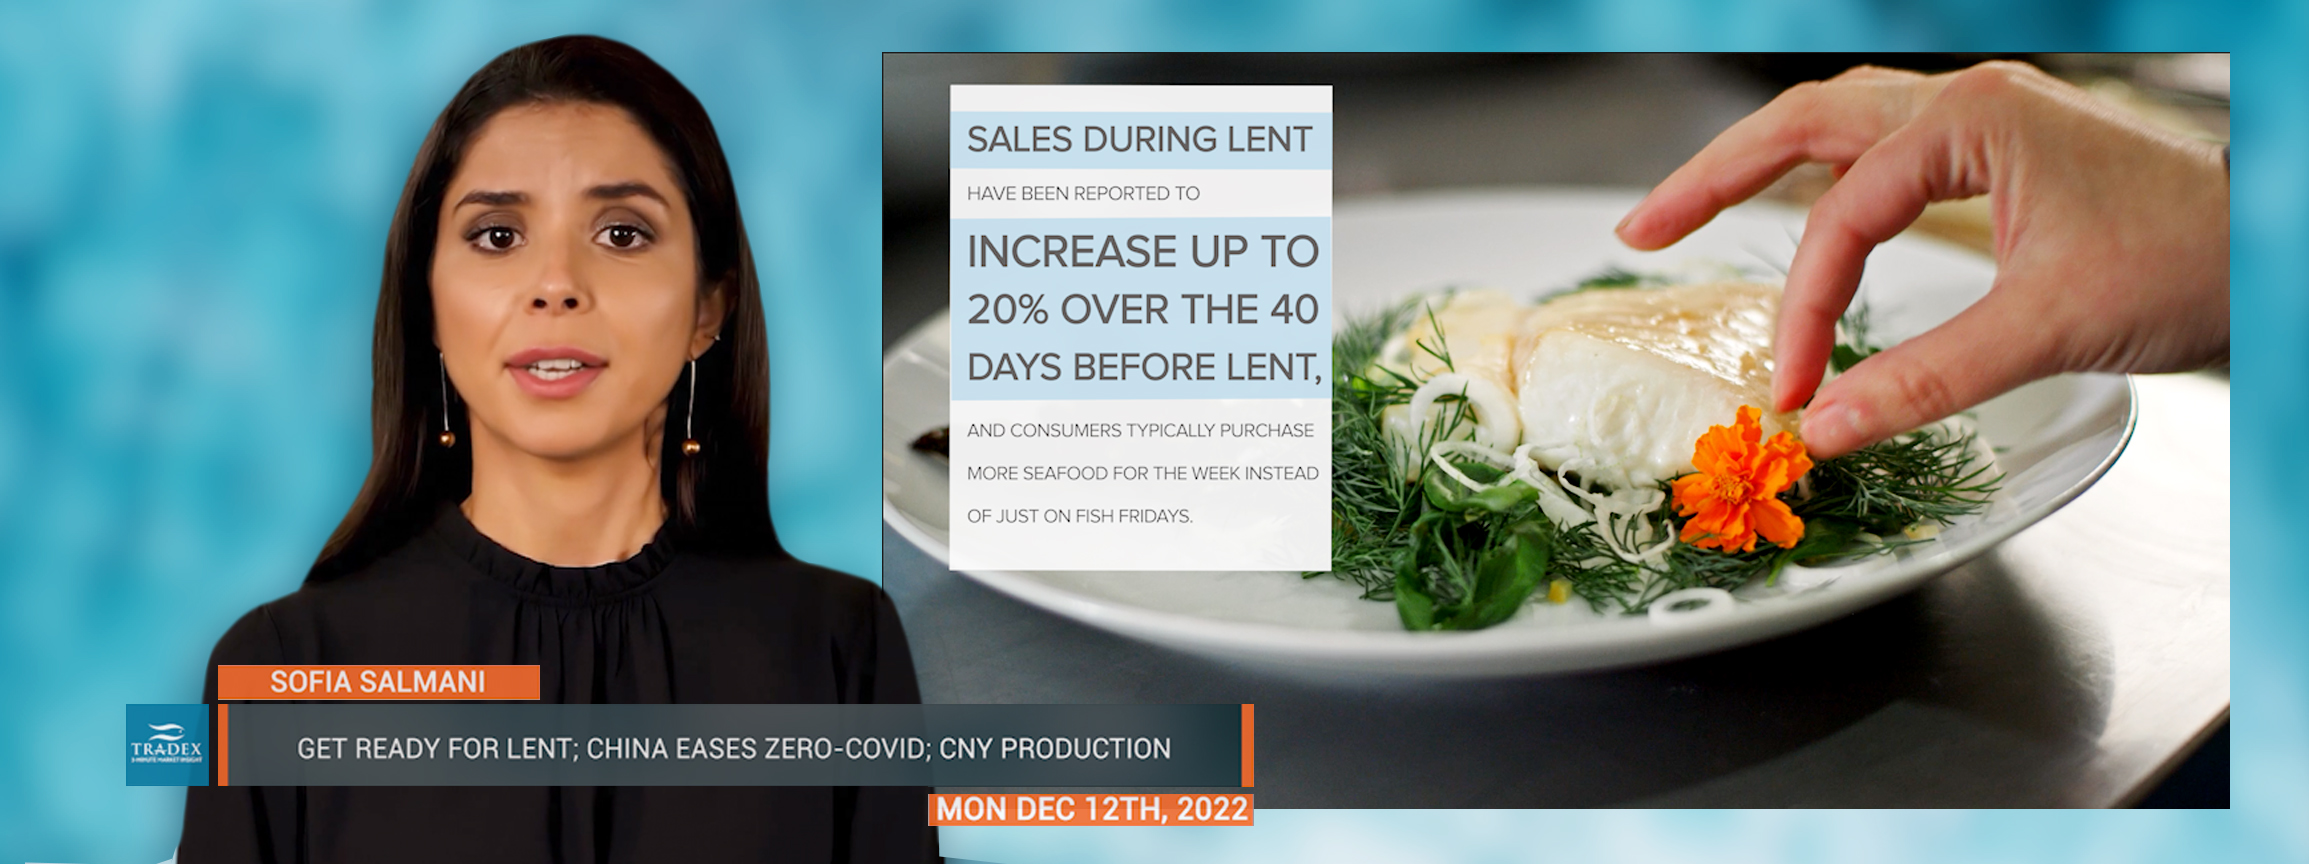 Sales during Lent have been reported to increase up to 20 percent over the 40 Days before Lent